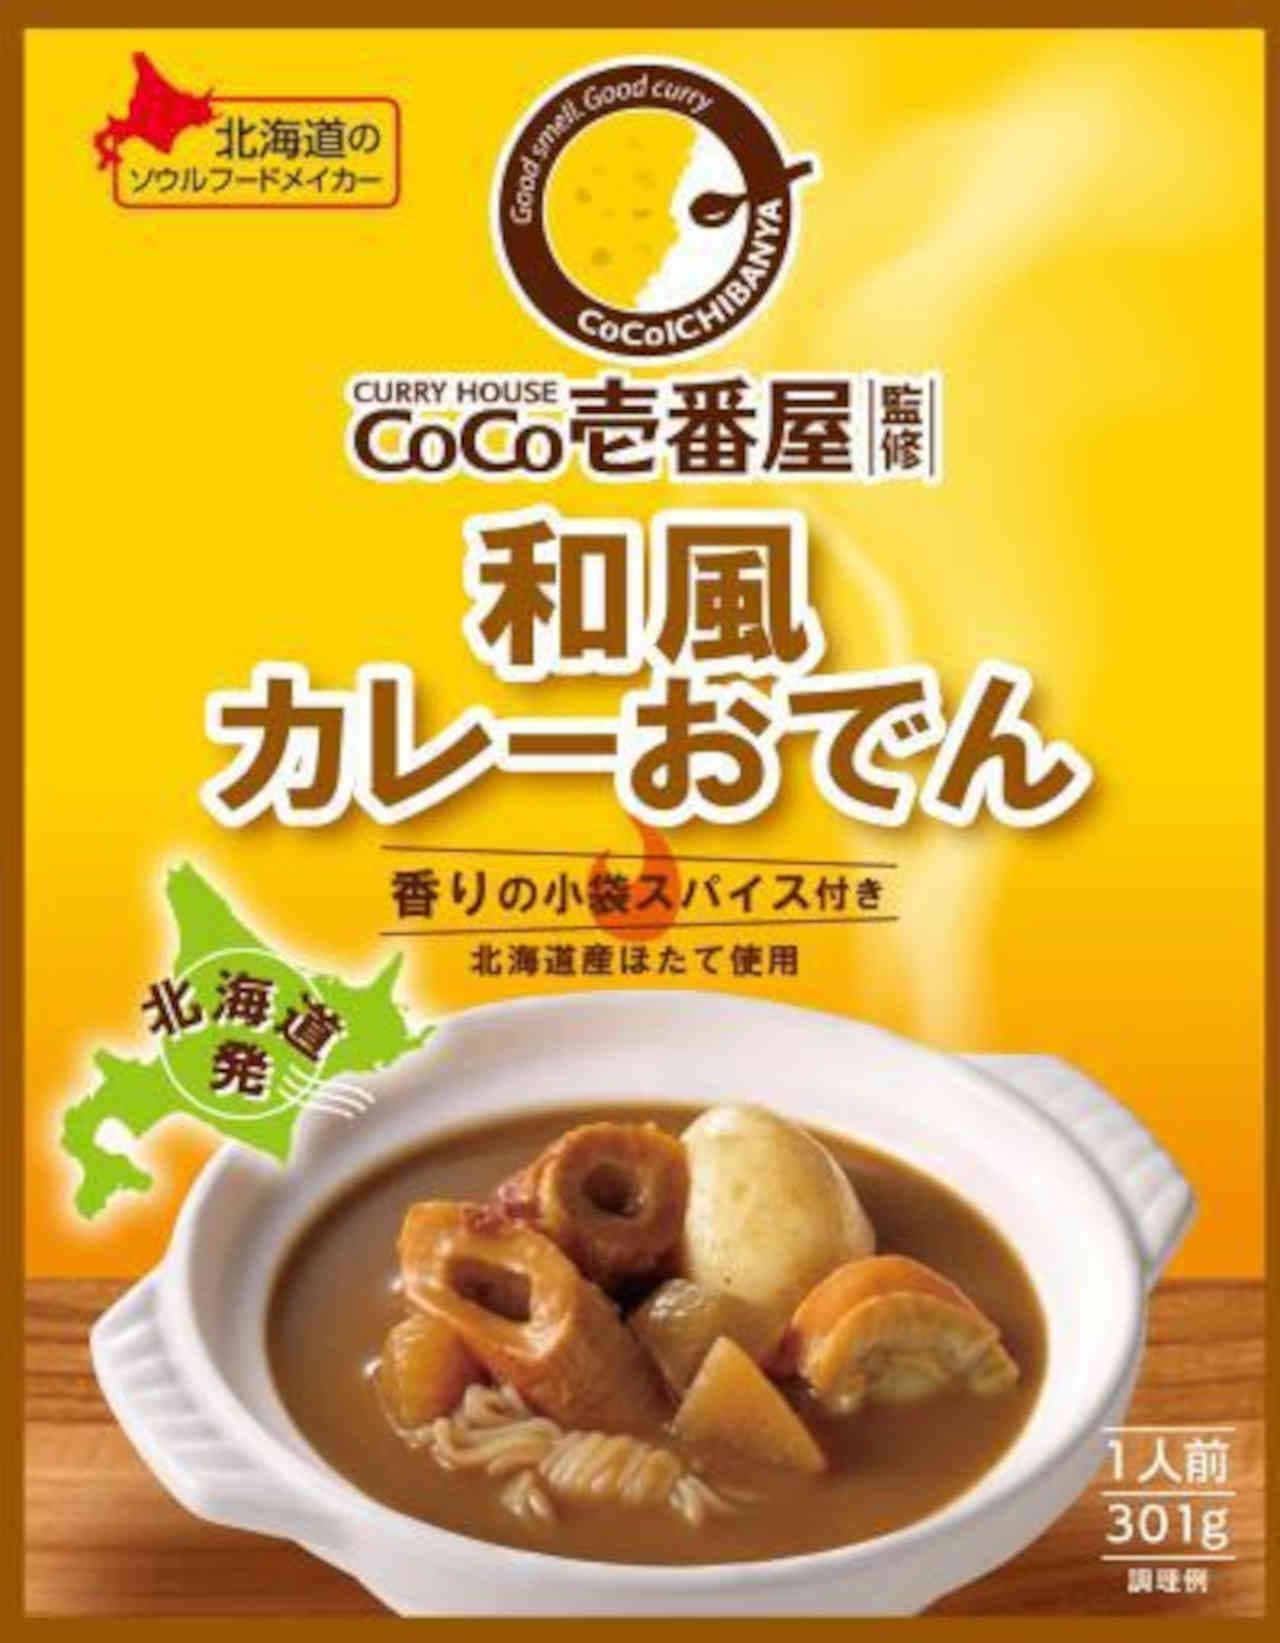 Coco Ichibanya "Japanese-style curry oden supervised by CoCo Ichibanya